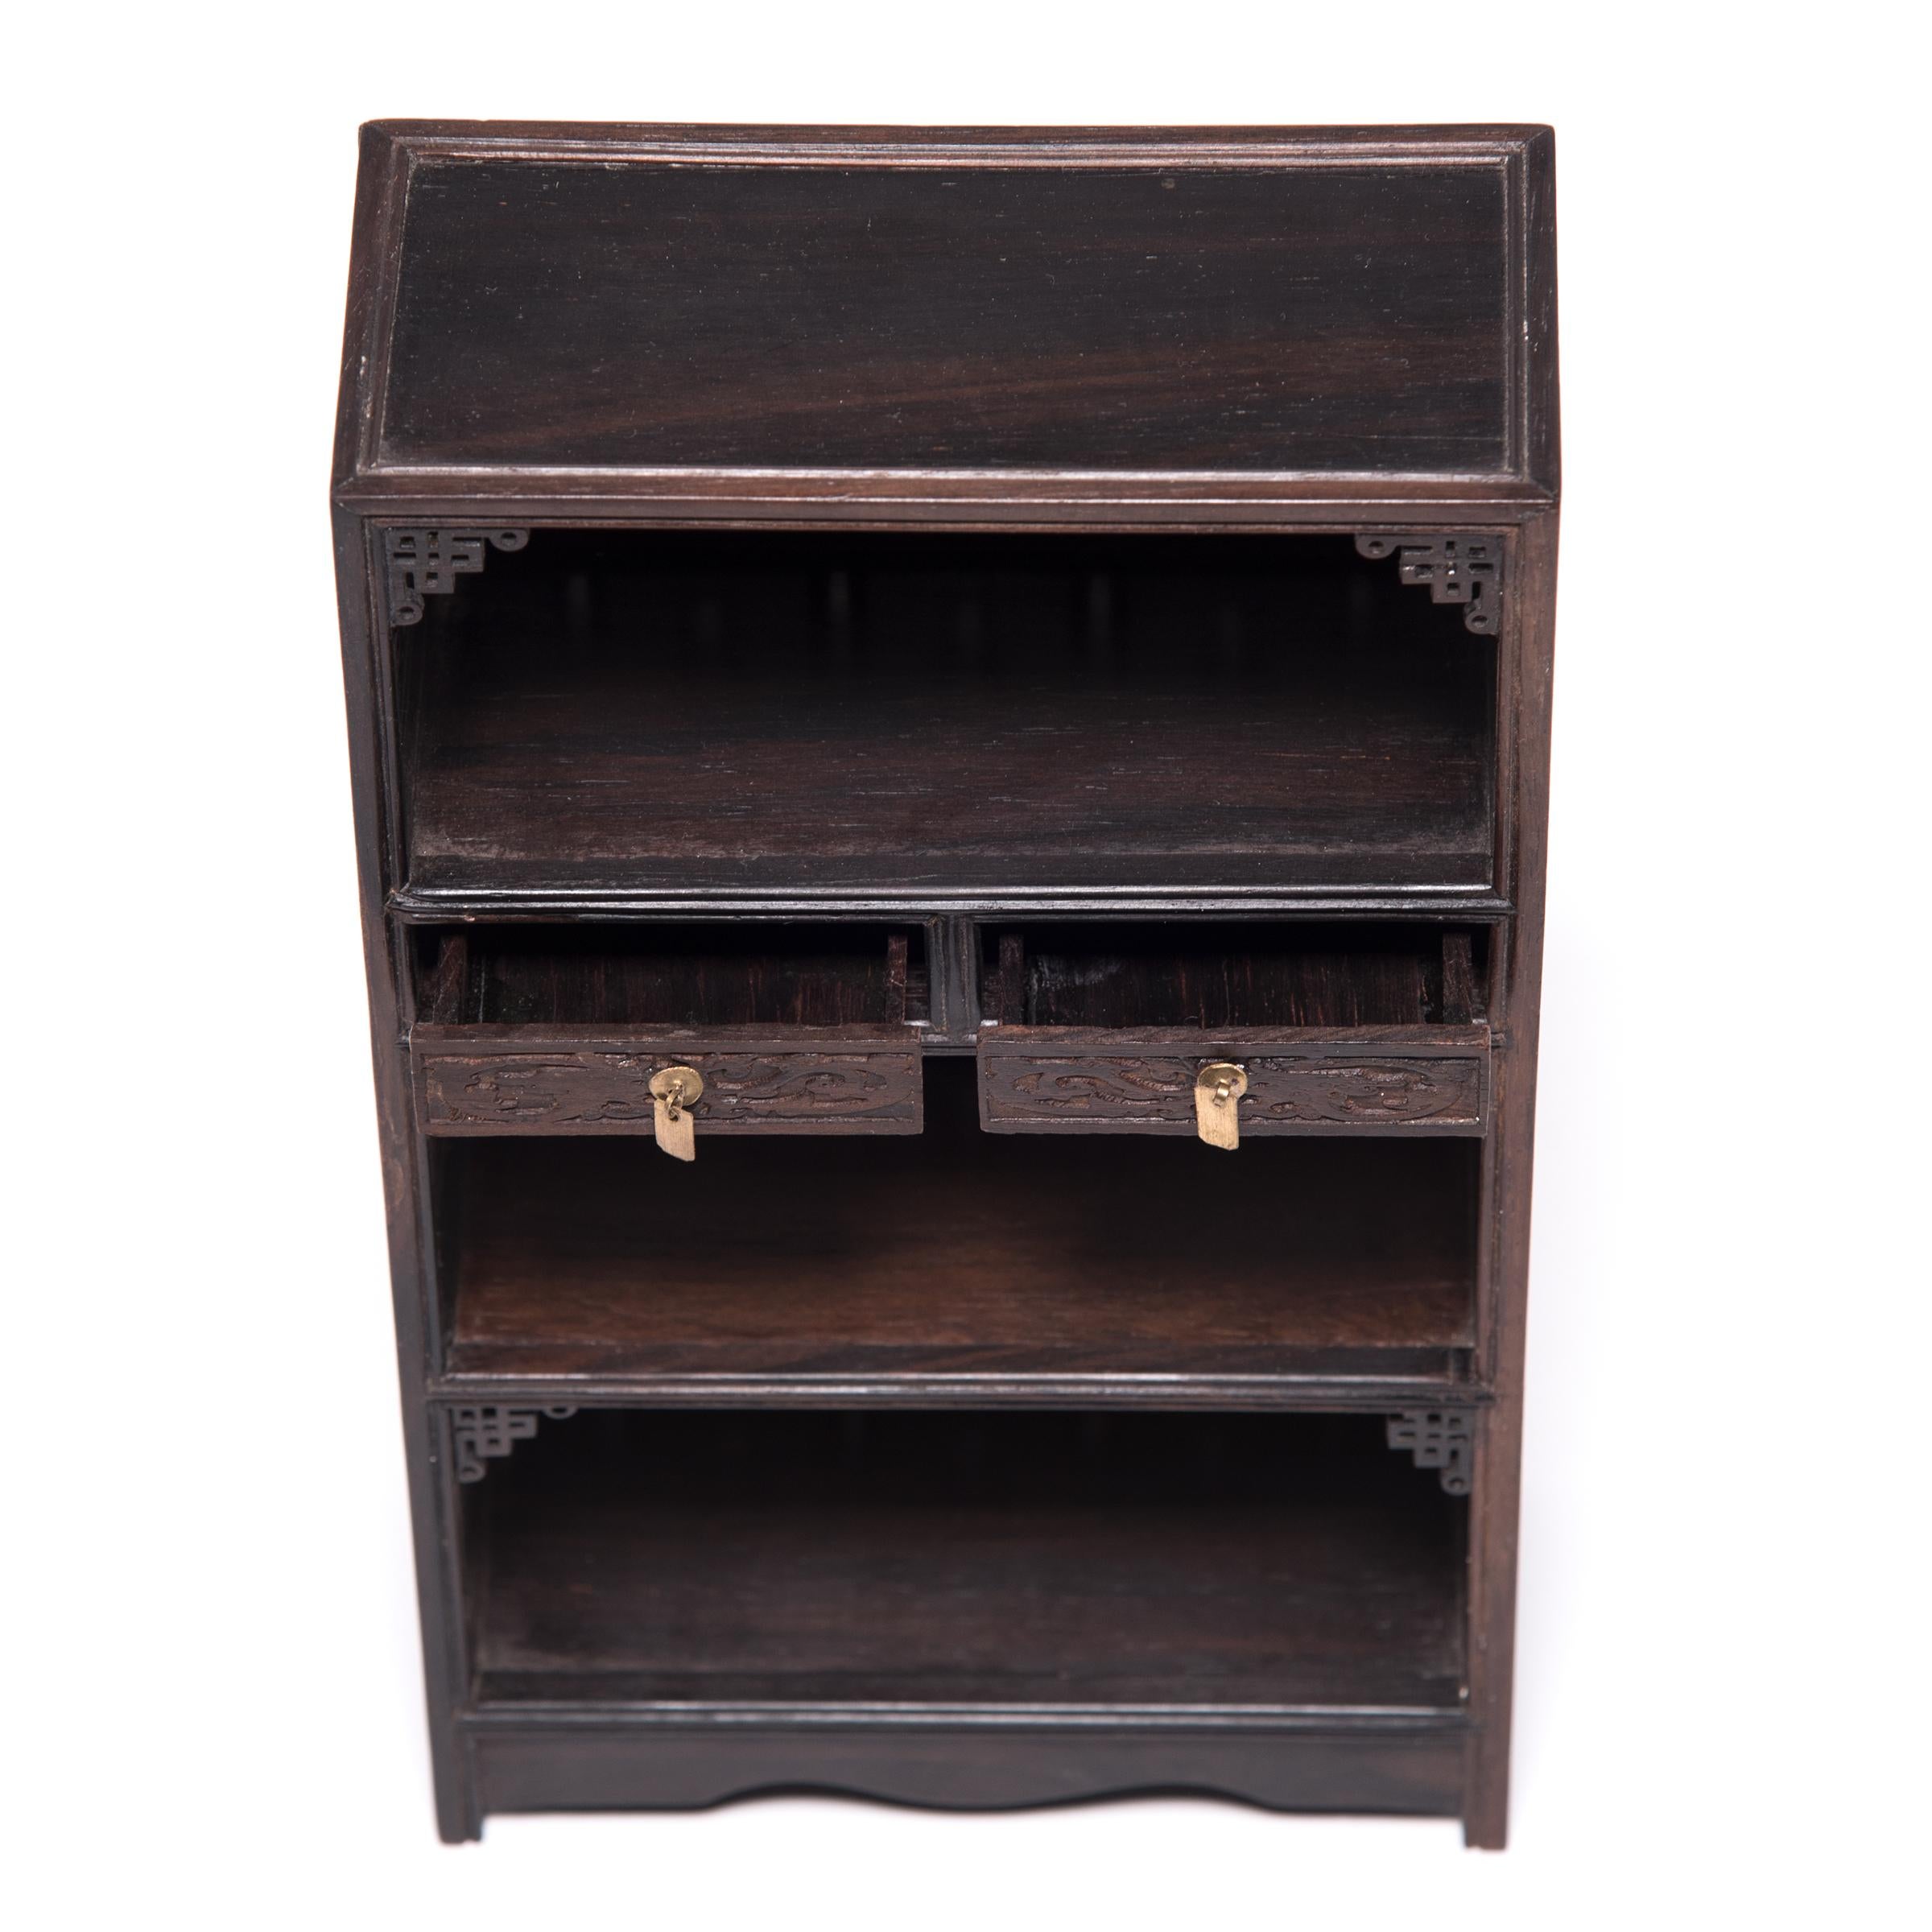 A full size bookcase with this level of workmanship and detail would be an incredible find, but this beautiful piece of furniture—at only nine inches tall—is perfectly constructed down to the tiniest minutia. The bookcase was made in northern China